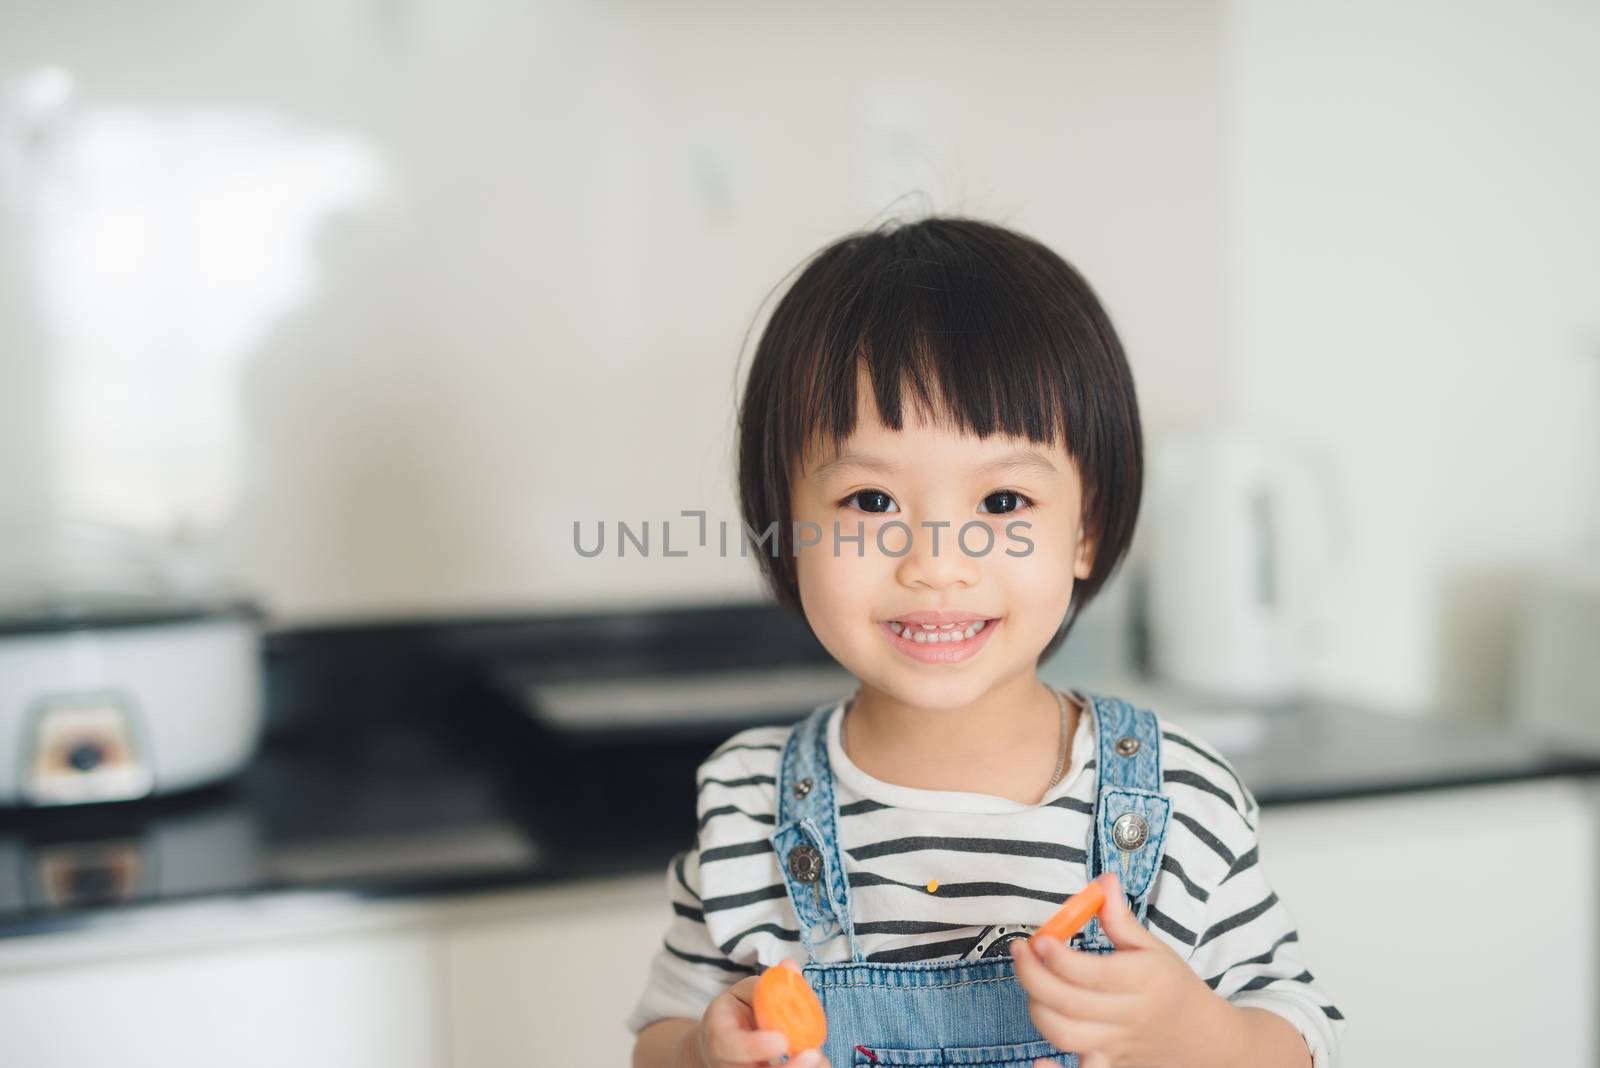 Child girl having fun with carrot. Home kitchen interior with fruits and vegetables.